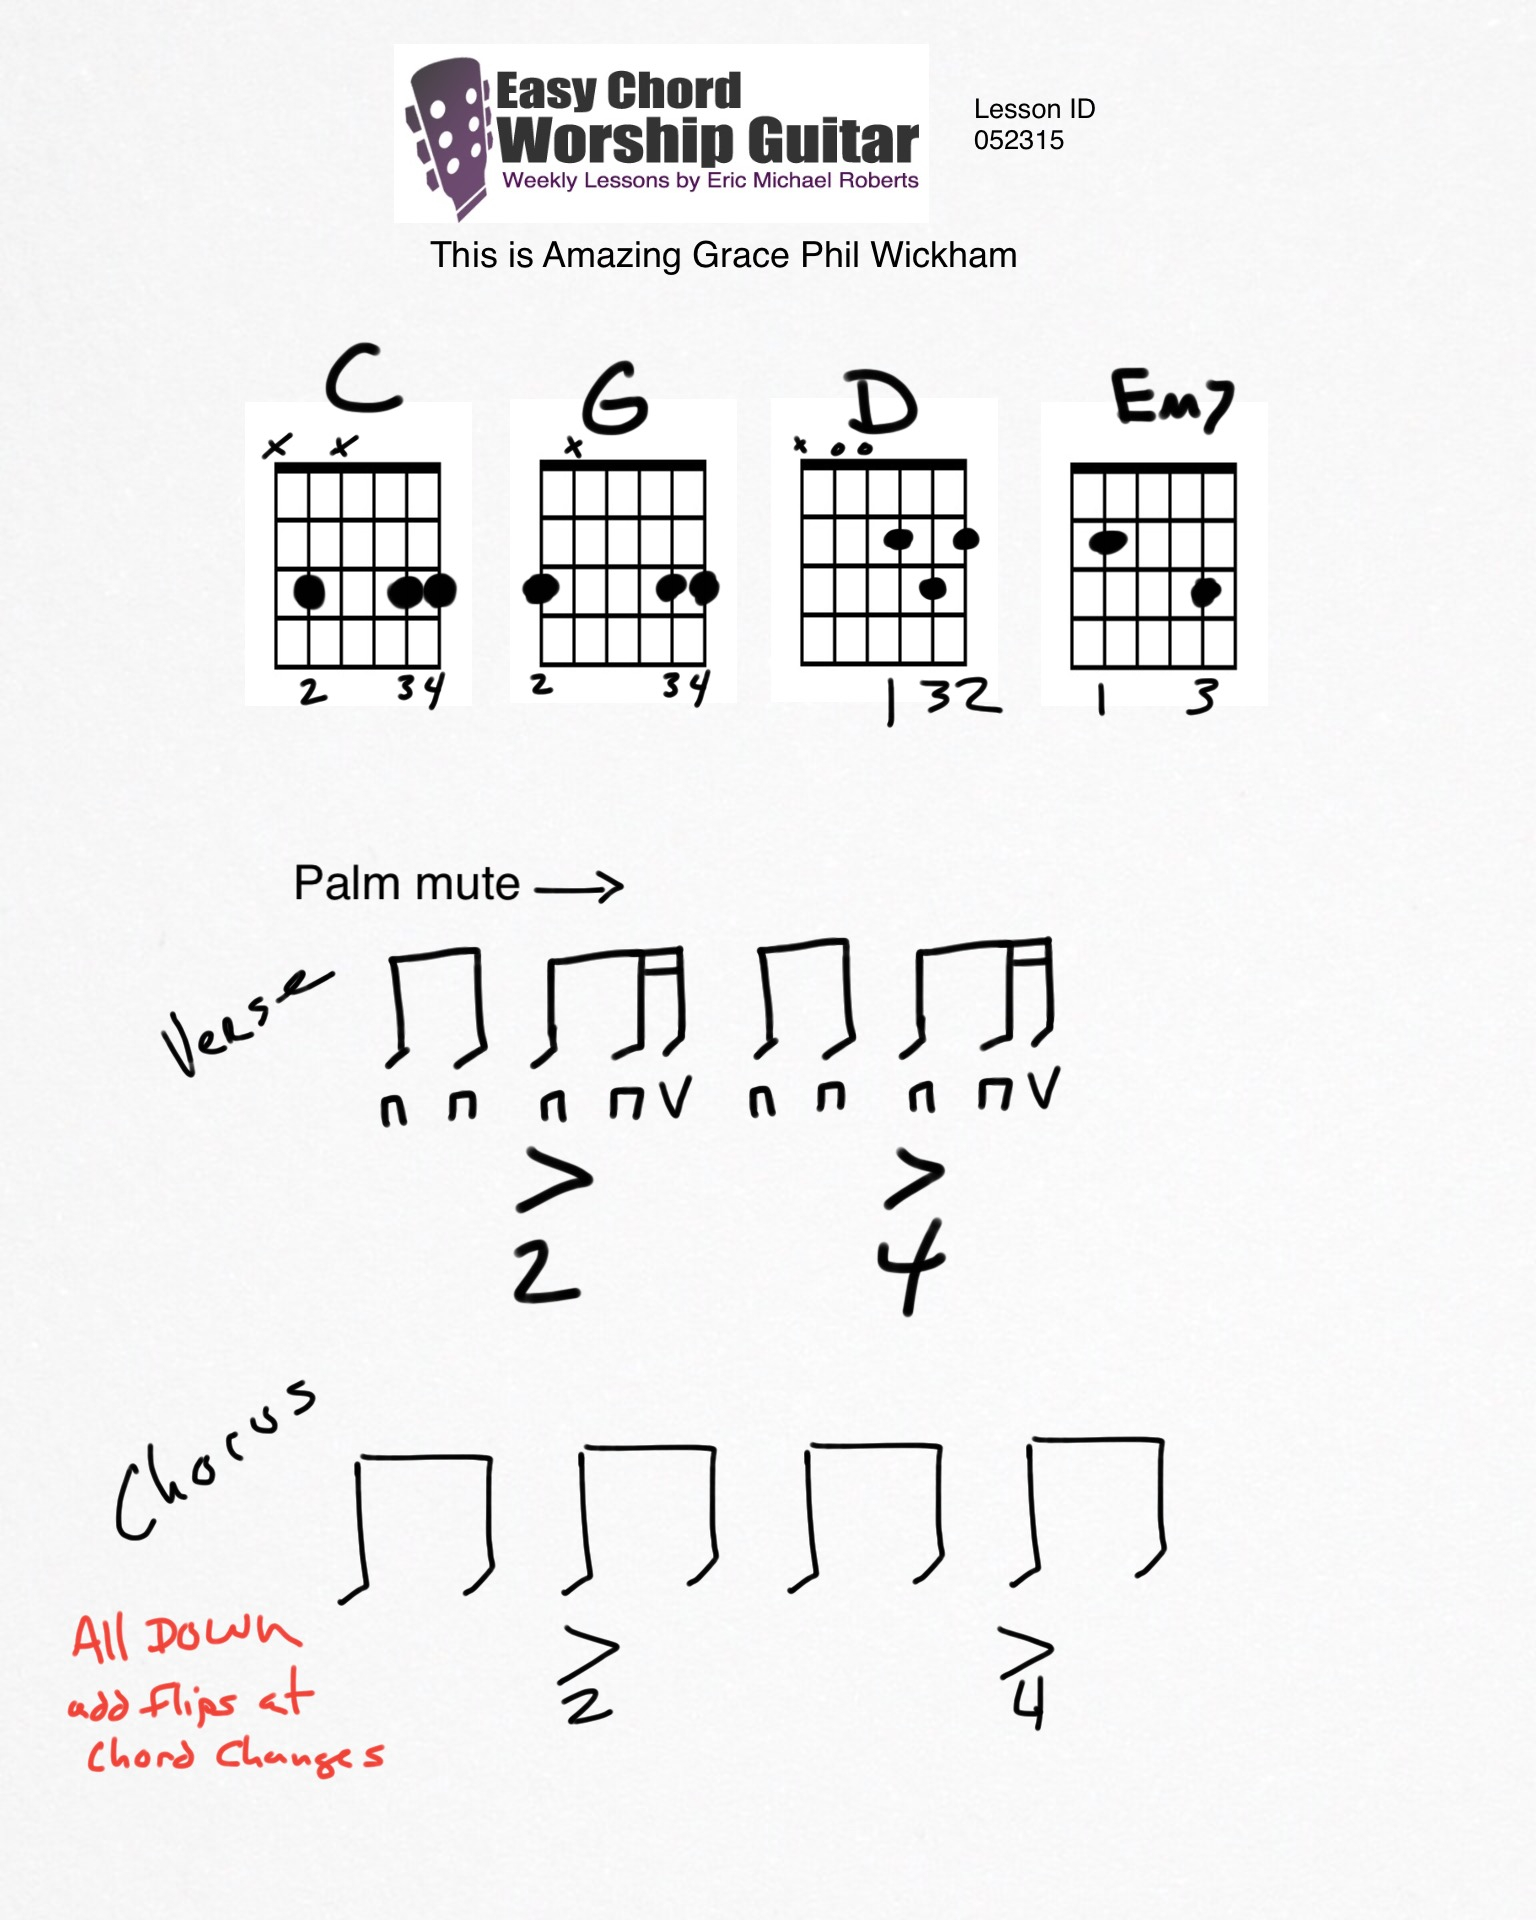 Amazing Grace Chords This Is Amazing Grace Phil Wickham Id052315 Easy Chord Worship